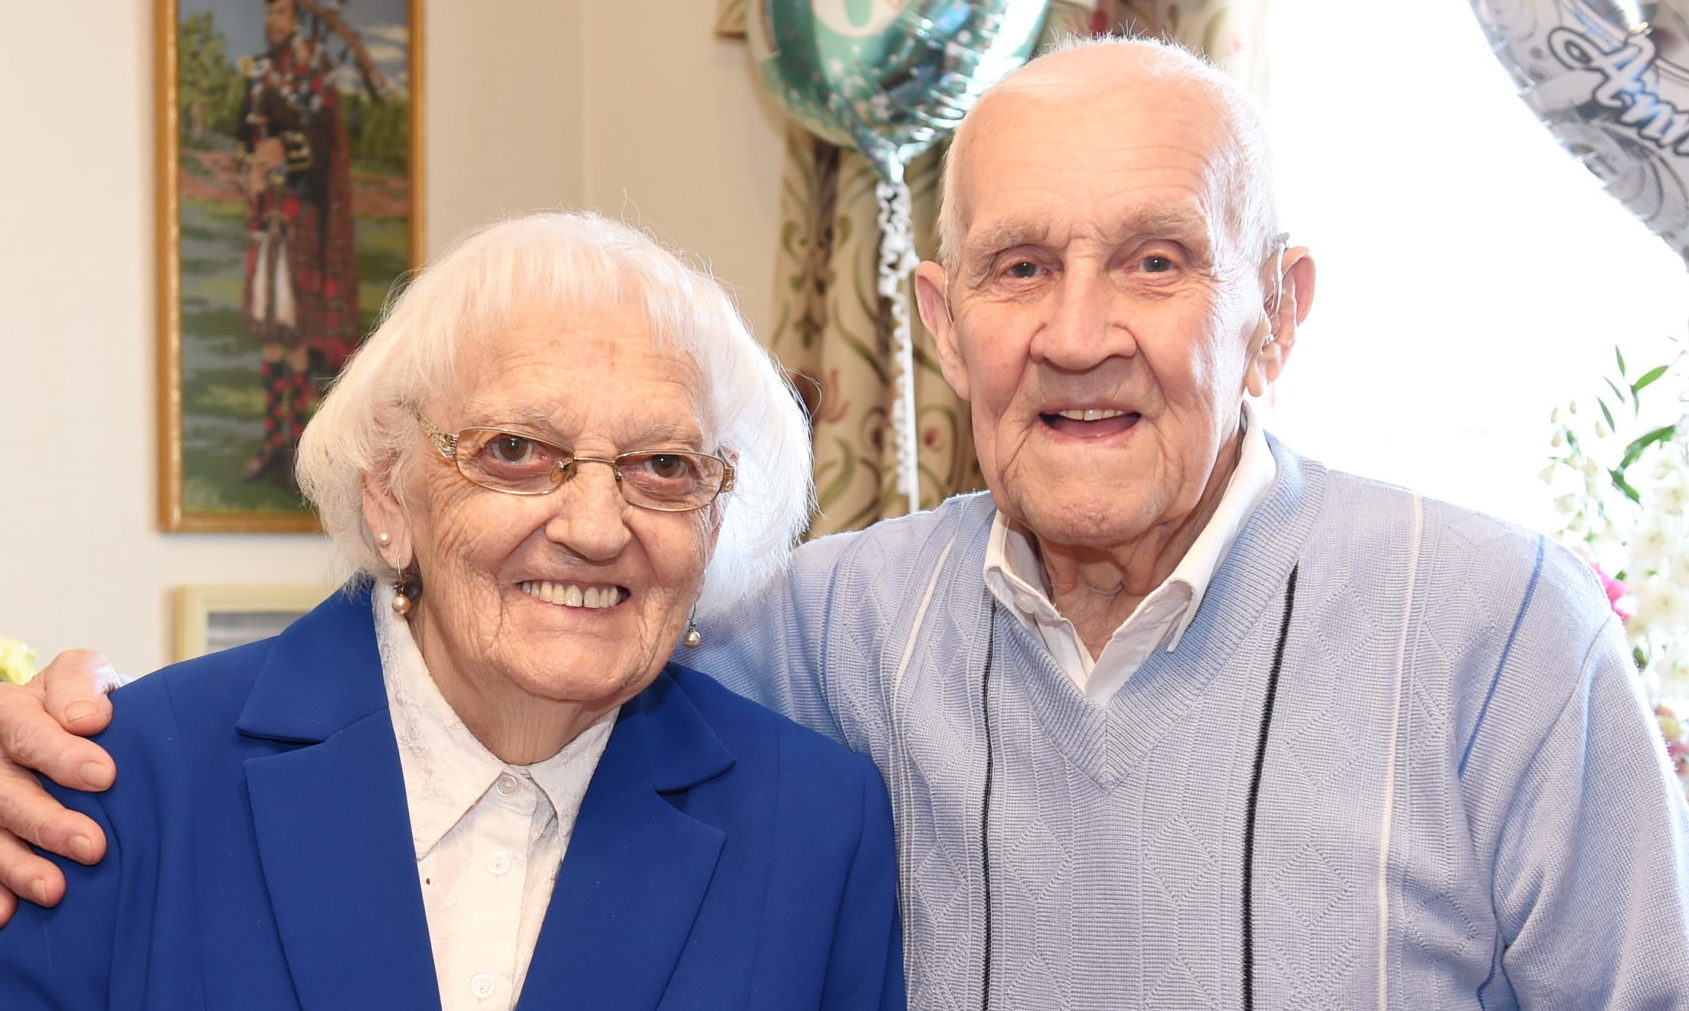 Olive and her husband Dod who are celebrating their platinum wedding anniversary this week

Picture by Paul Glendell